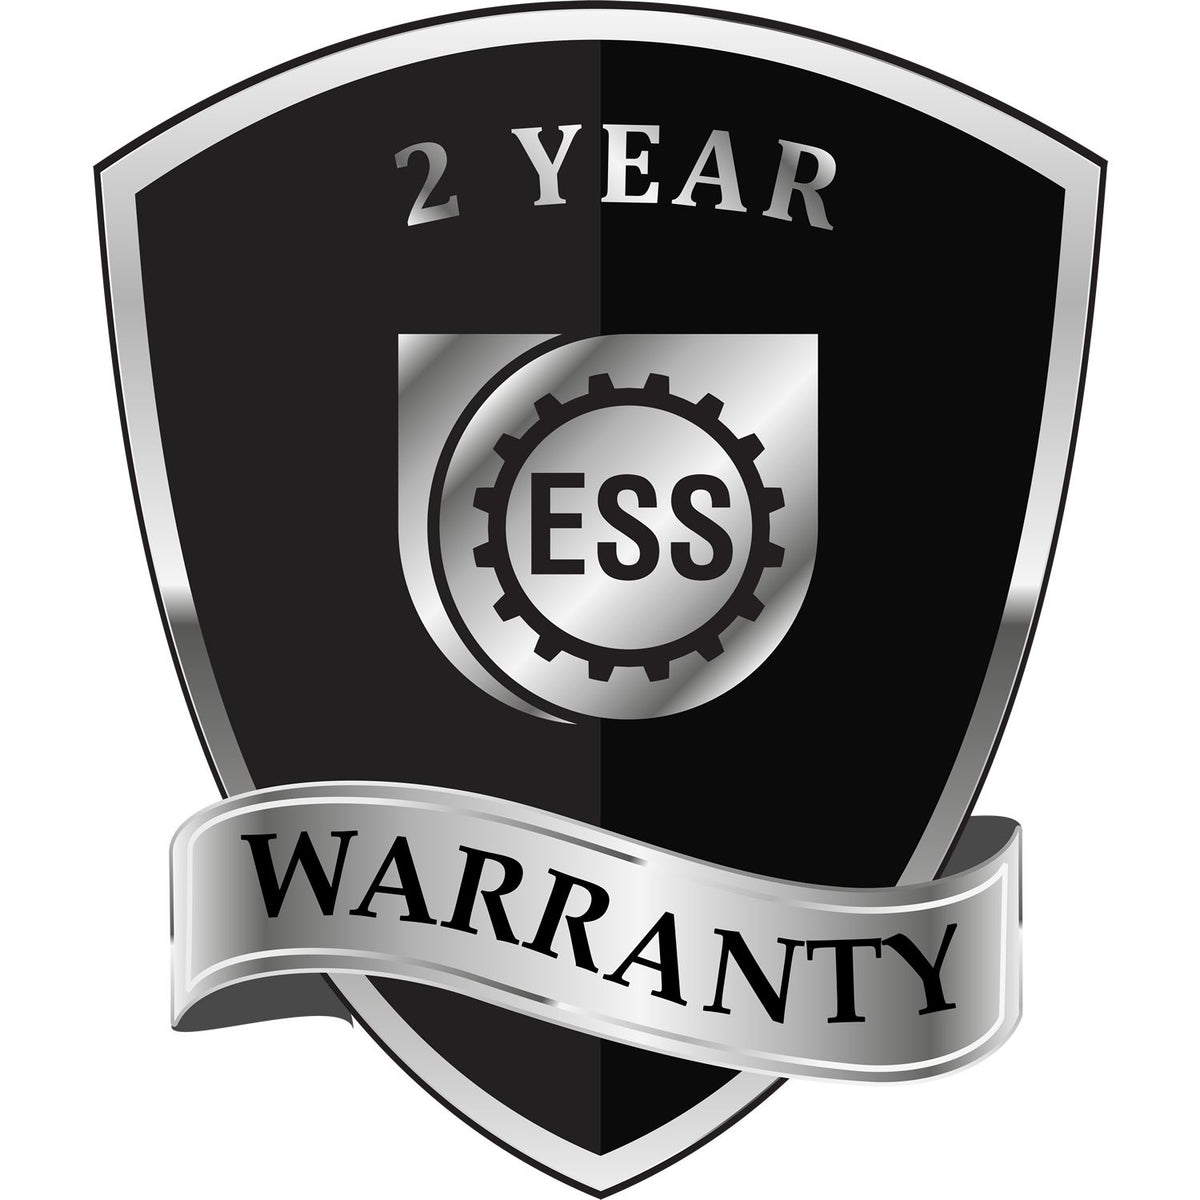 A badge or emblem showing a warranty icon for the Soft Utah Professional Engineer Seal